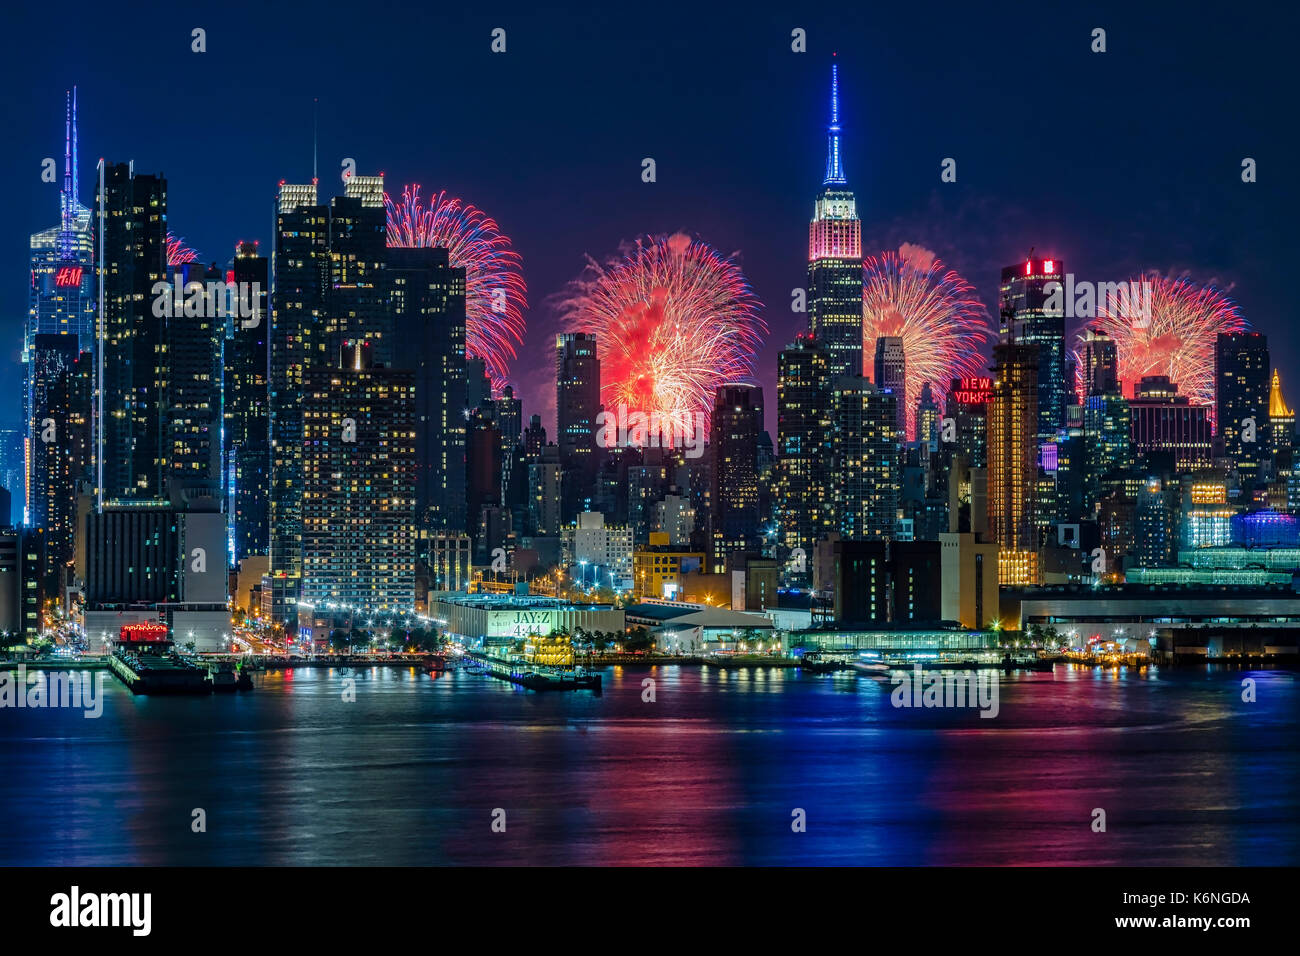 NYC Fireworks Celebration -  New York City skyline with the Macy's Spectacular 4th of July Fireworks Celebration Show as a backdrop to midtown Manhattan. Stock Photo